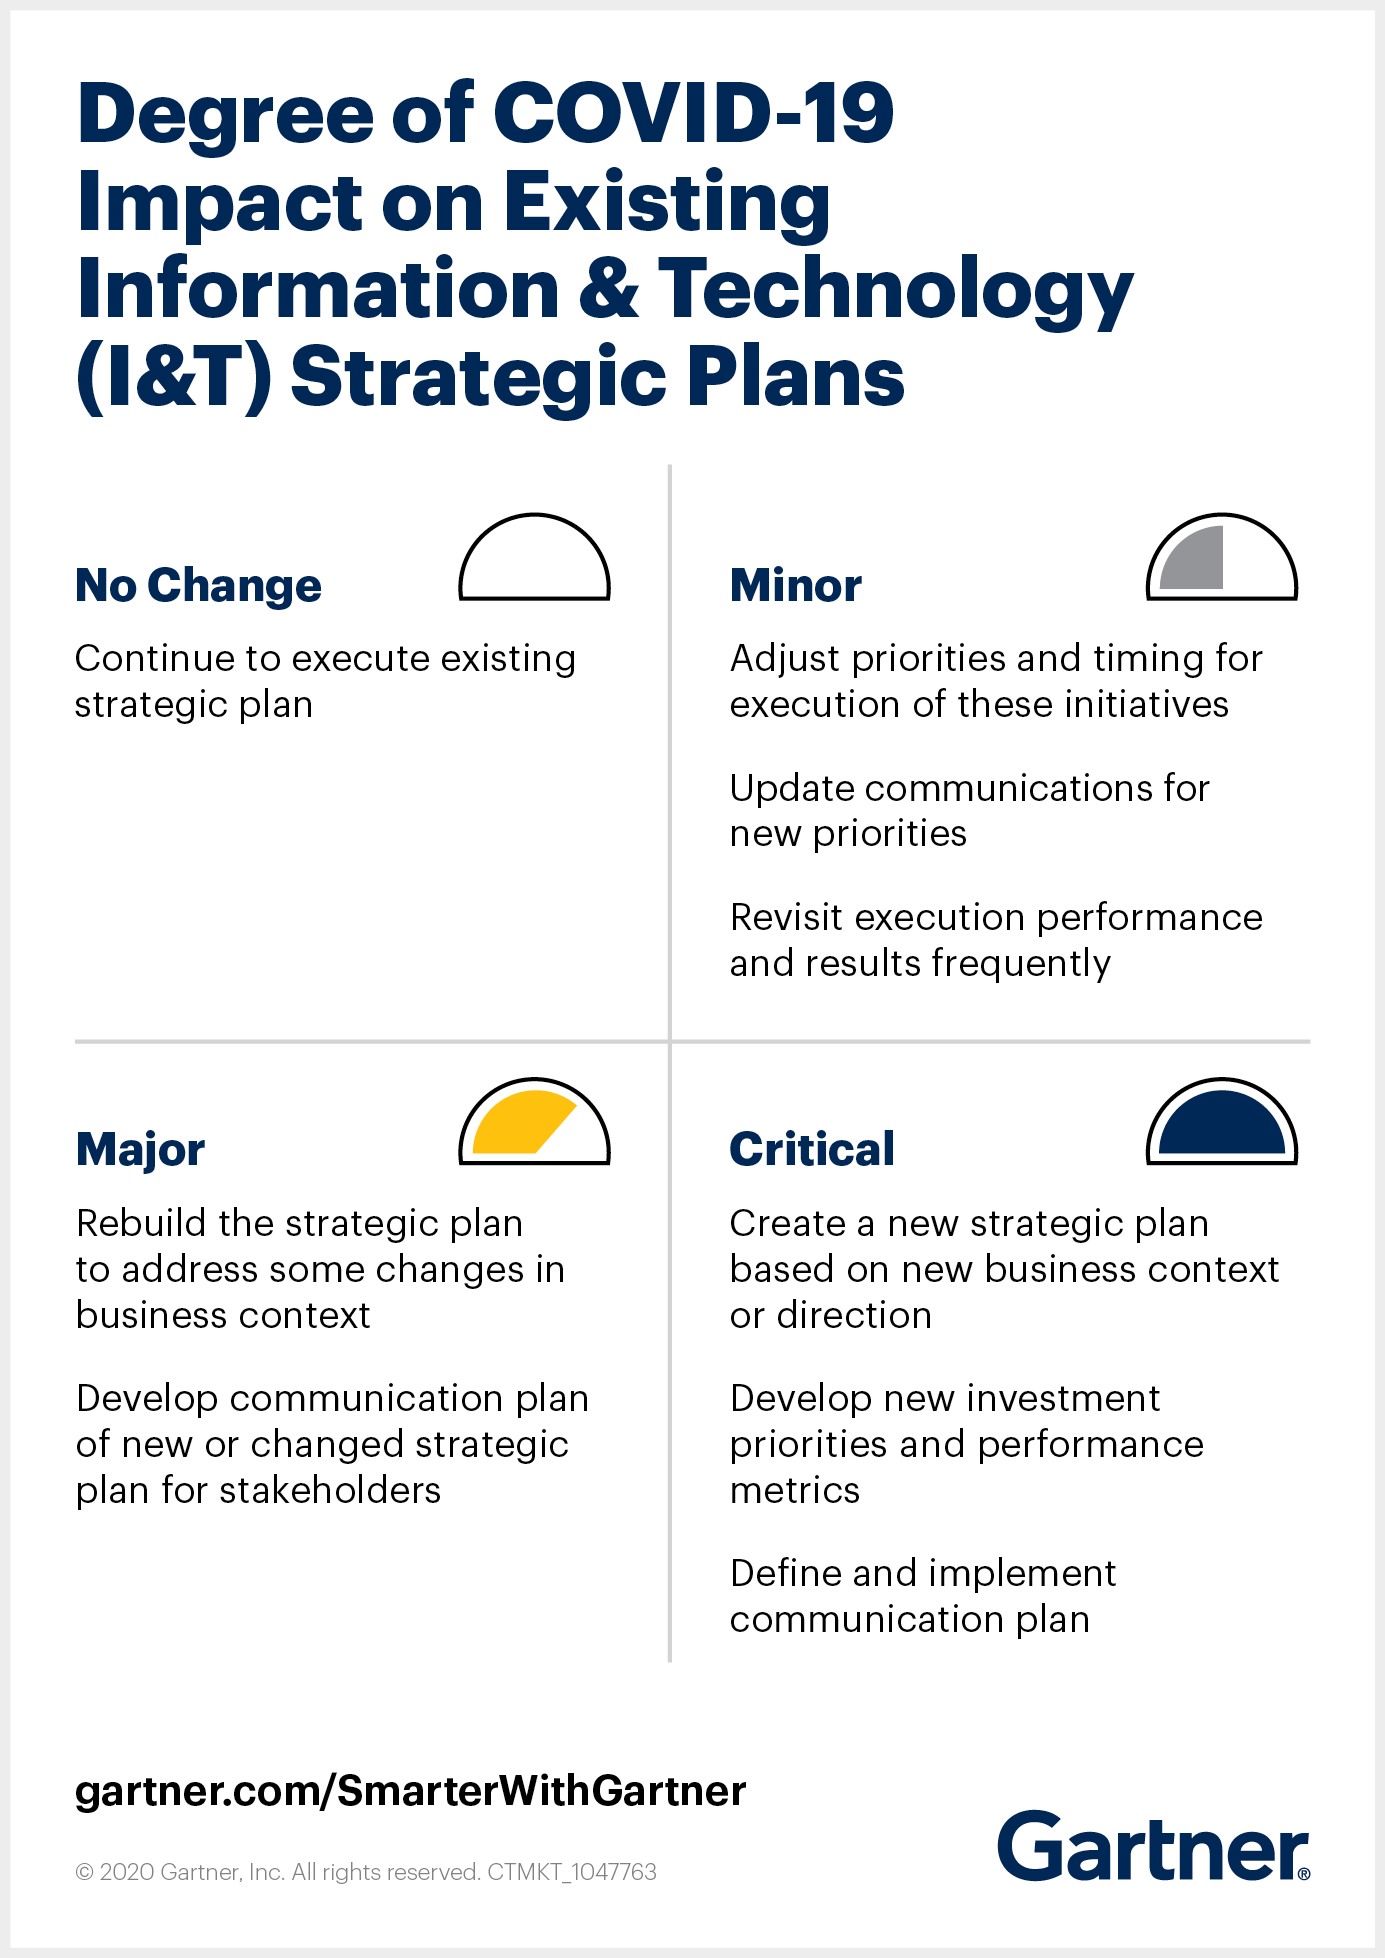 Gartner illustrates the degree of the COVID-19 impact on existing information and technology strategic planning.